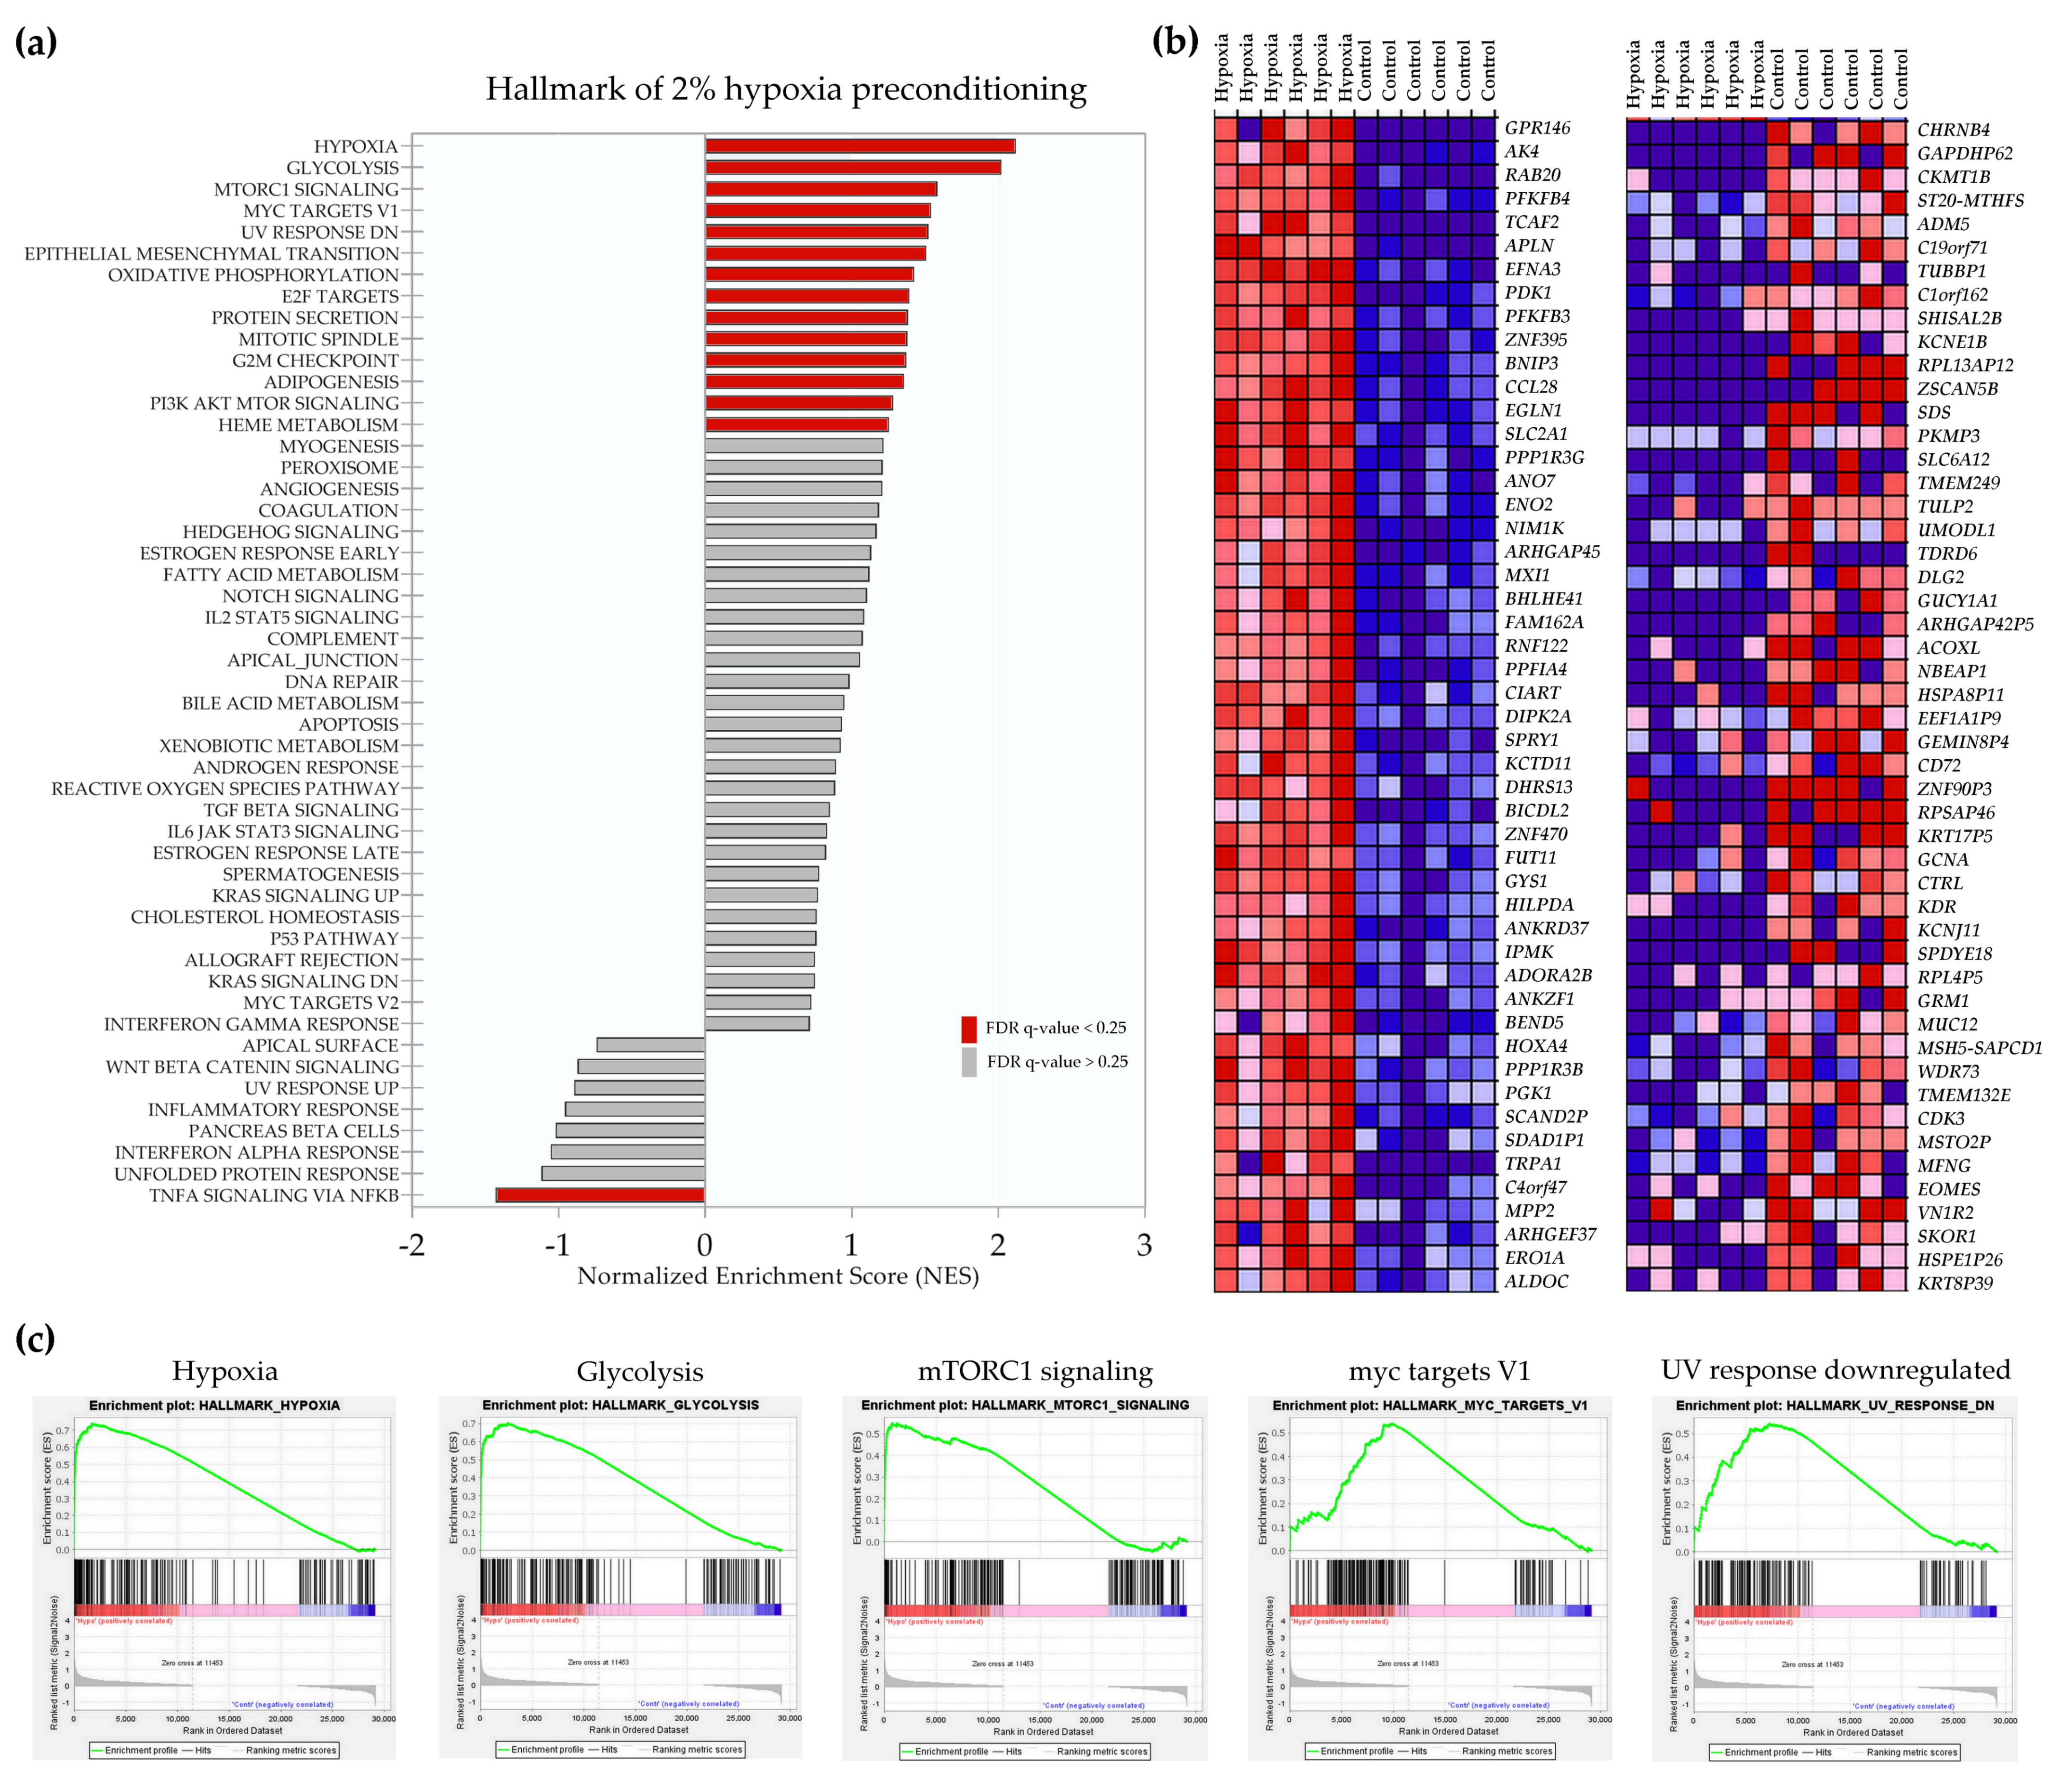 IJMS | Free Full-Text | Gene Expression Profile of Human Mesenchymal  Stromal Cells Exposed to Hypoxic and Pseudohypoxic Preconditioning—An  Analysis by RNA Sequencing